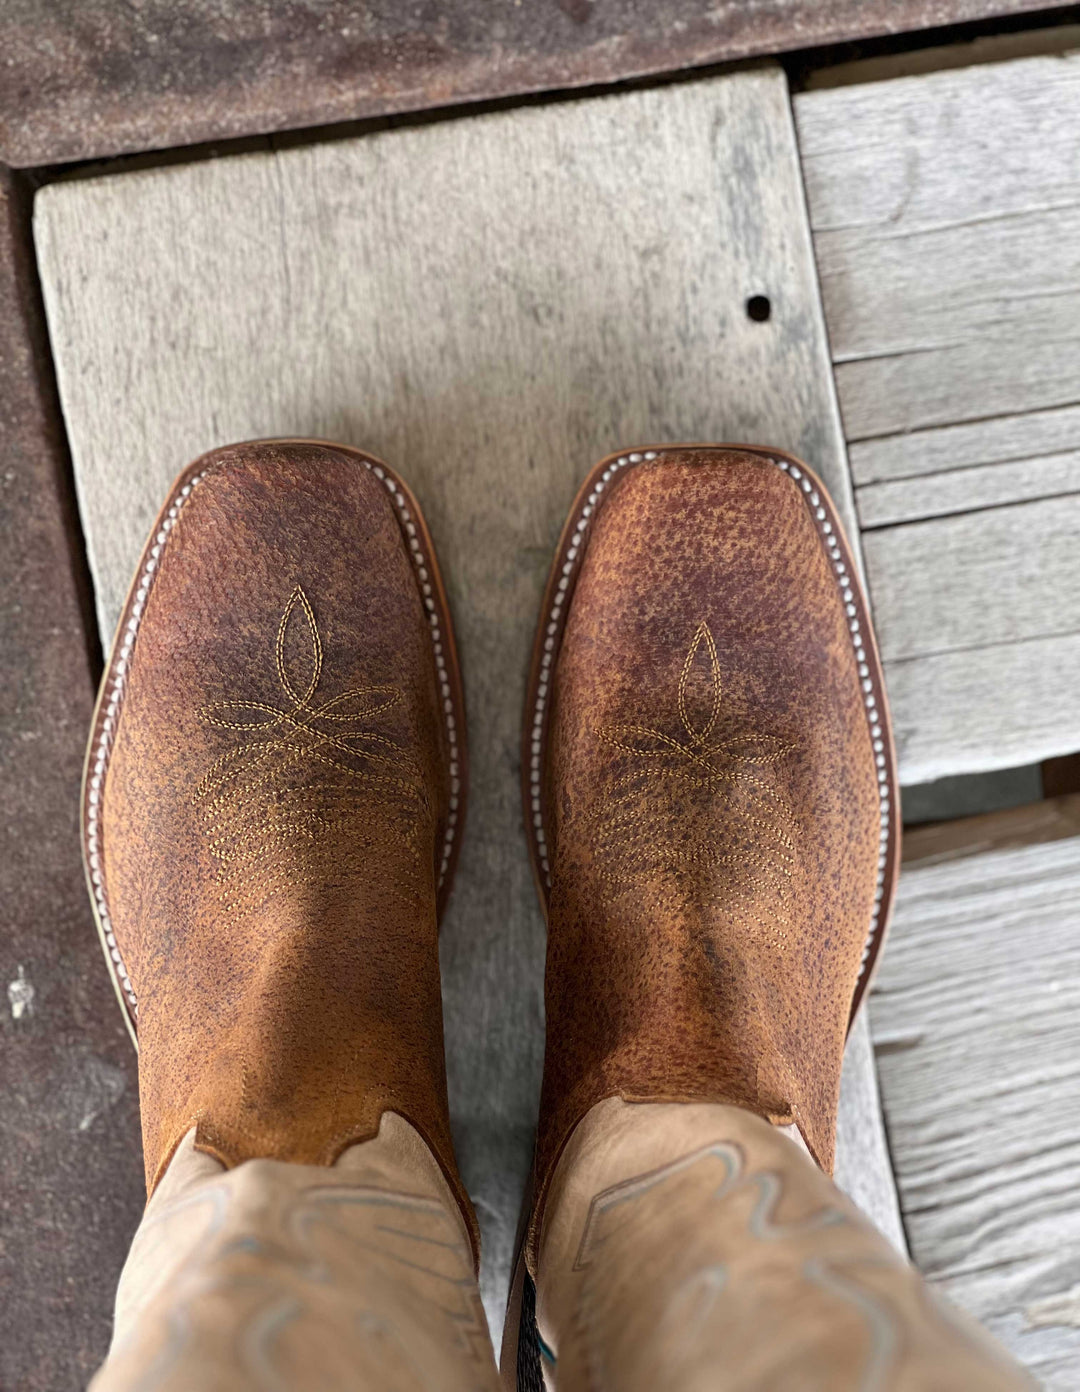 Toe View Olathe Boot Co. | Outpost X Evan Felker Tag Boar Boot